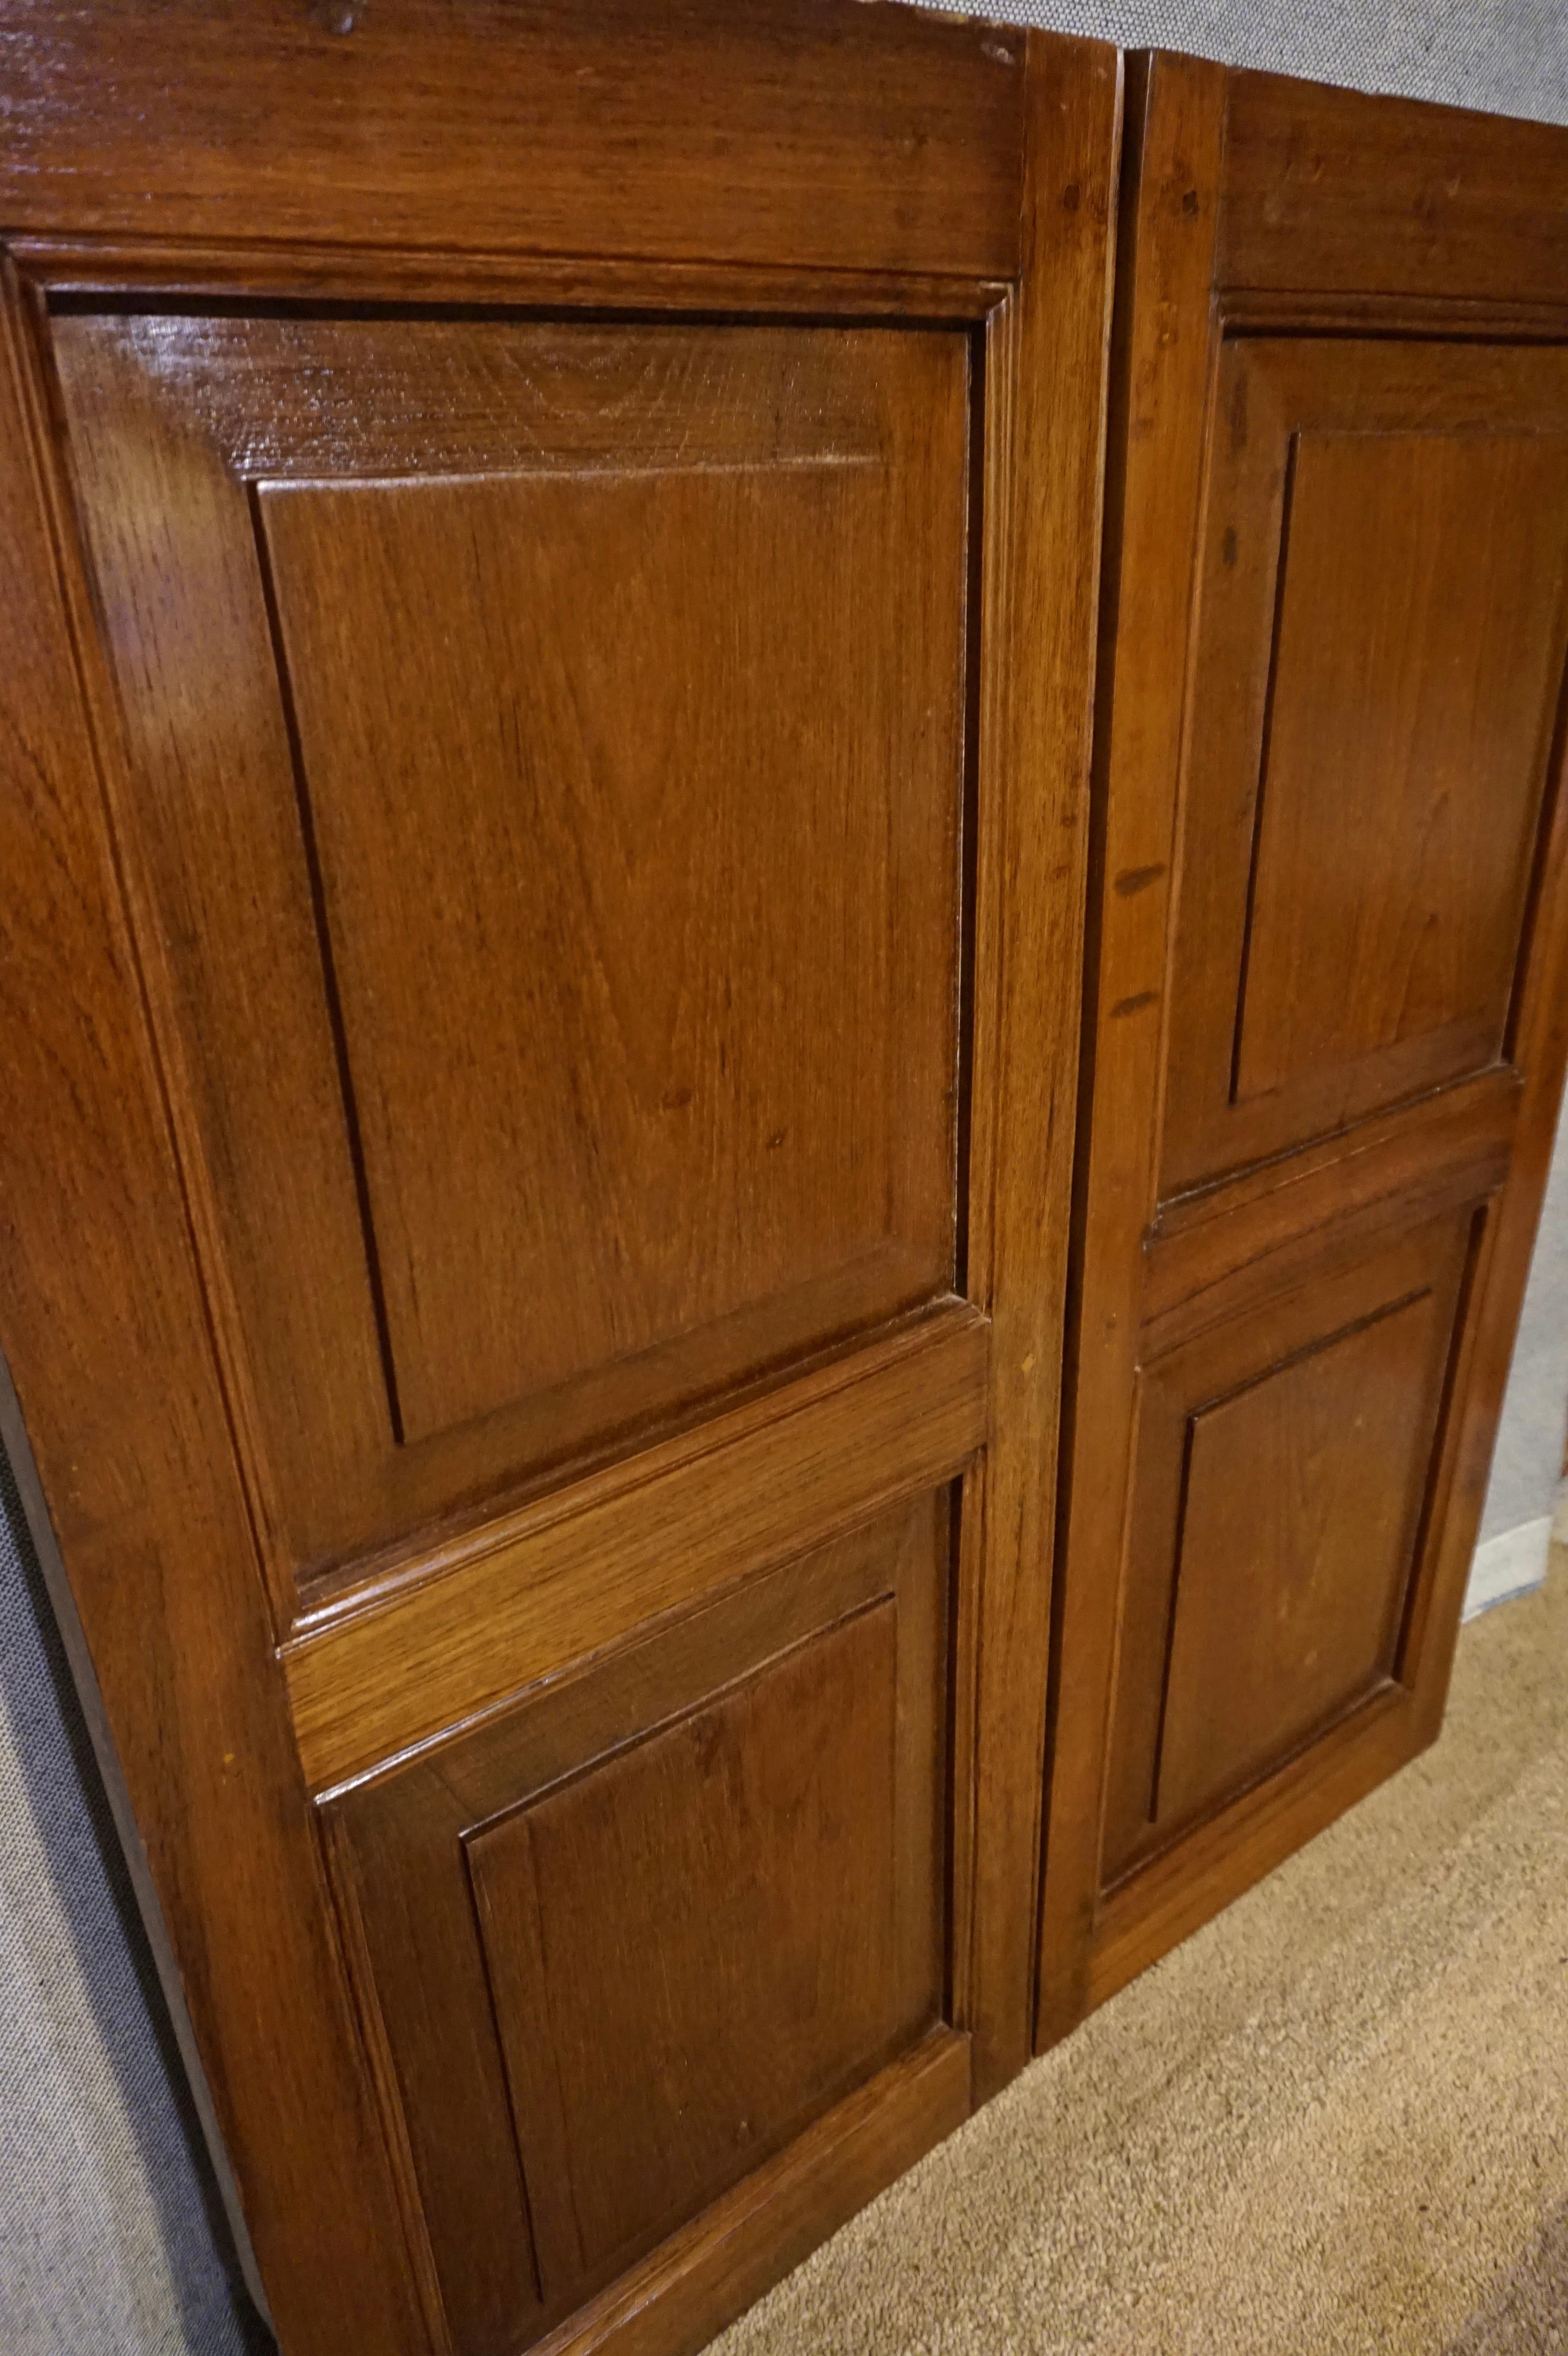 Carved British Colonial Solid Teak Plantation Shutters with Panel Work Dovetailed For Sale